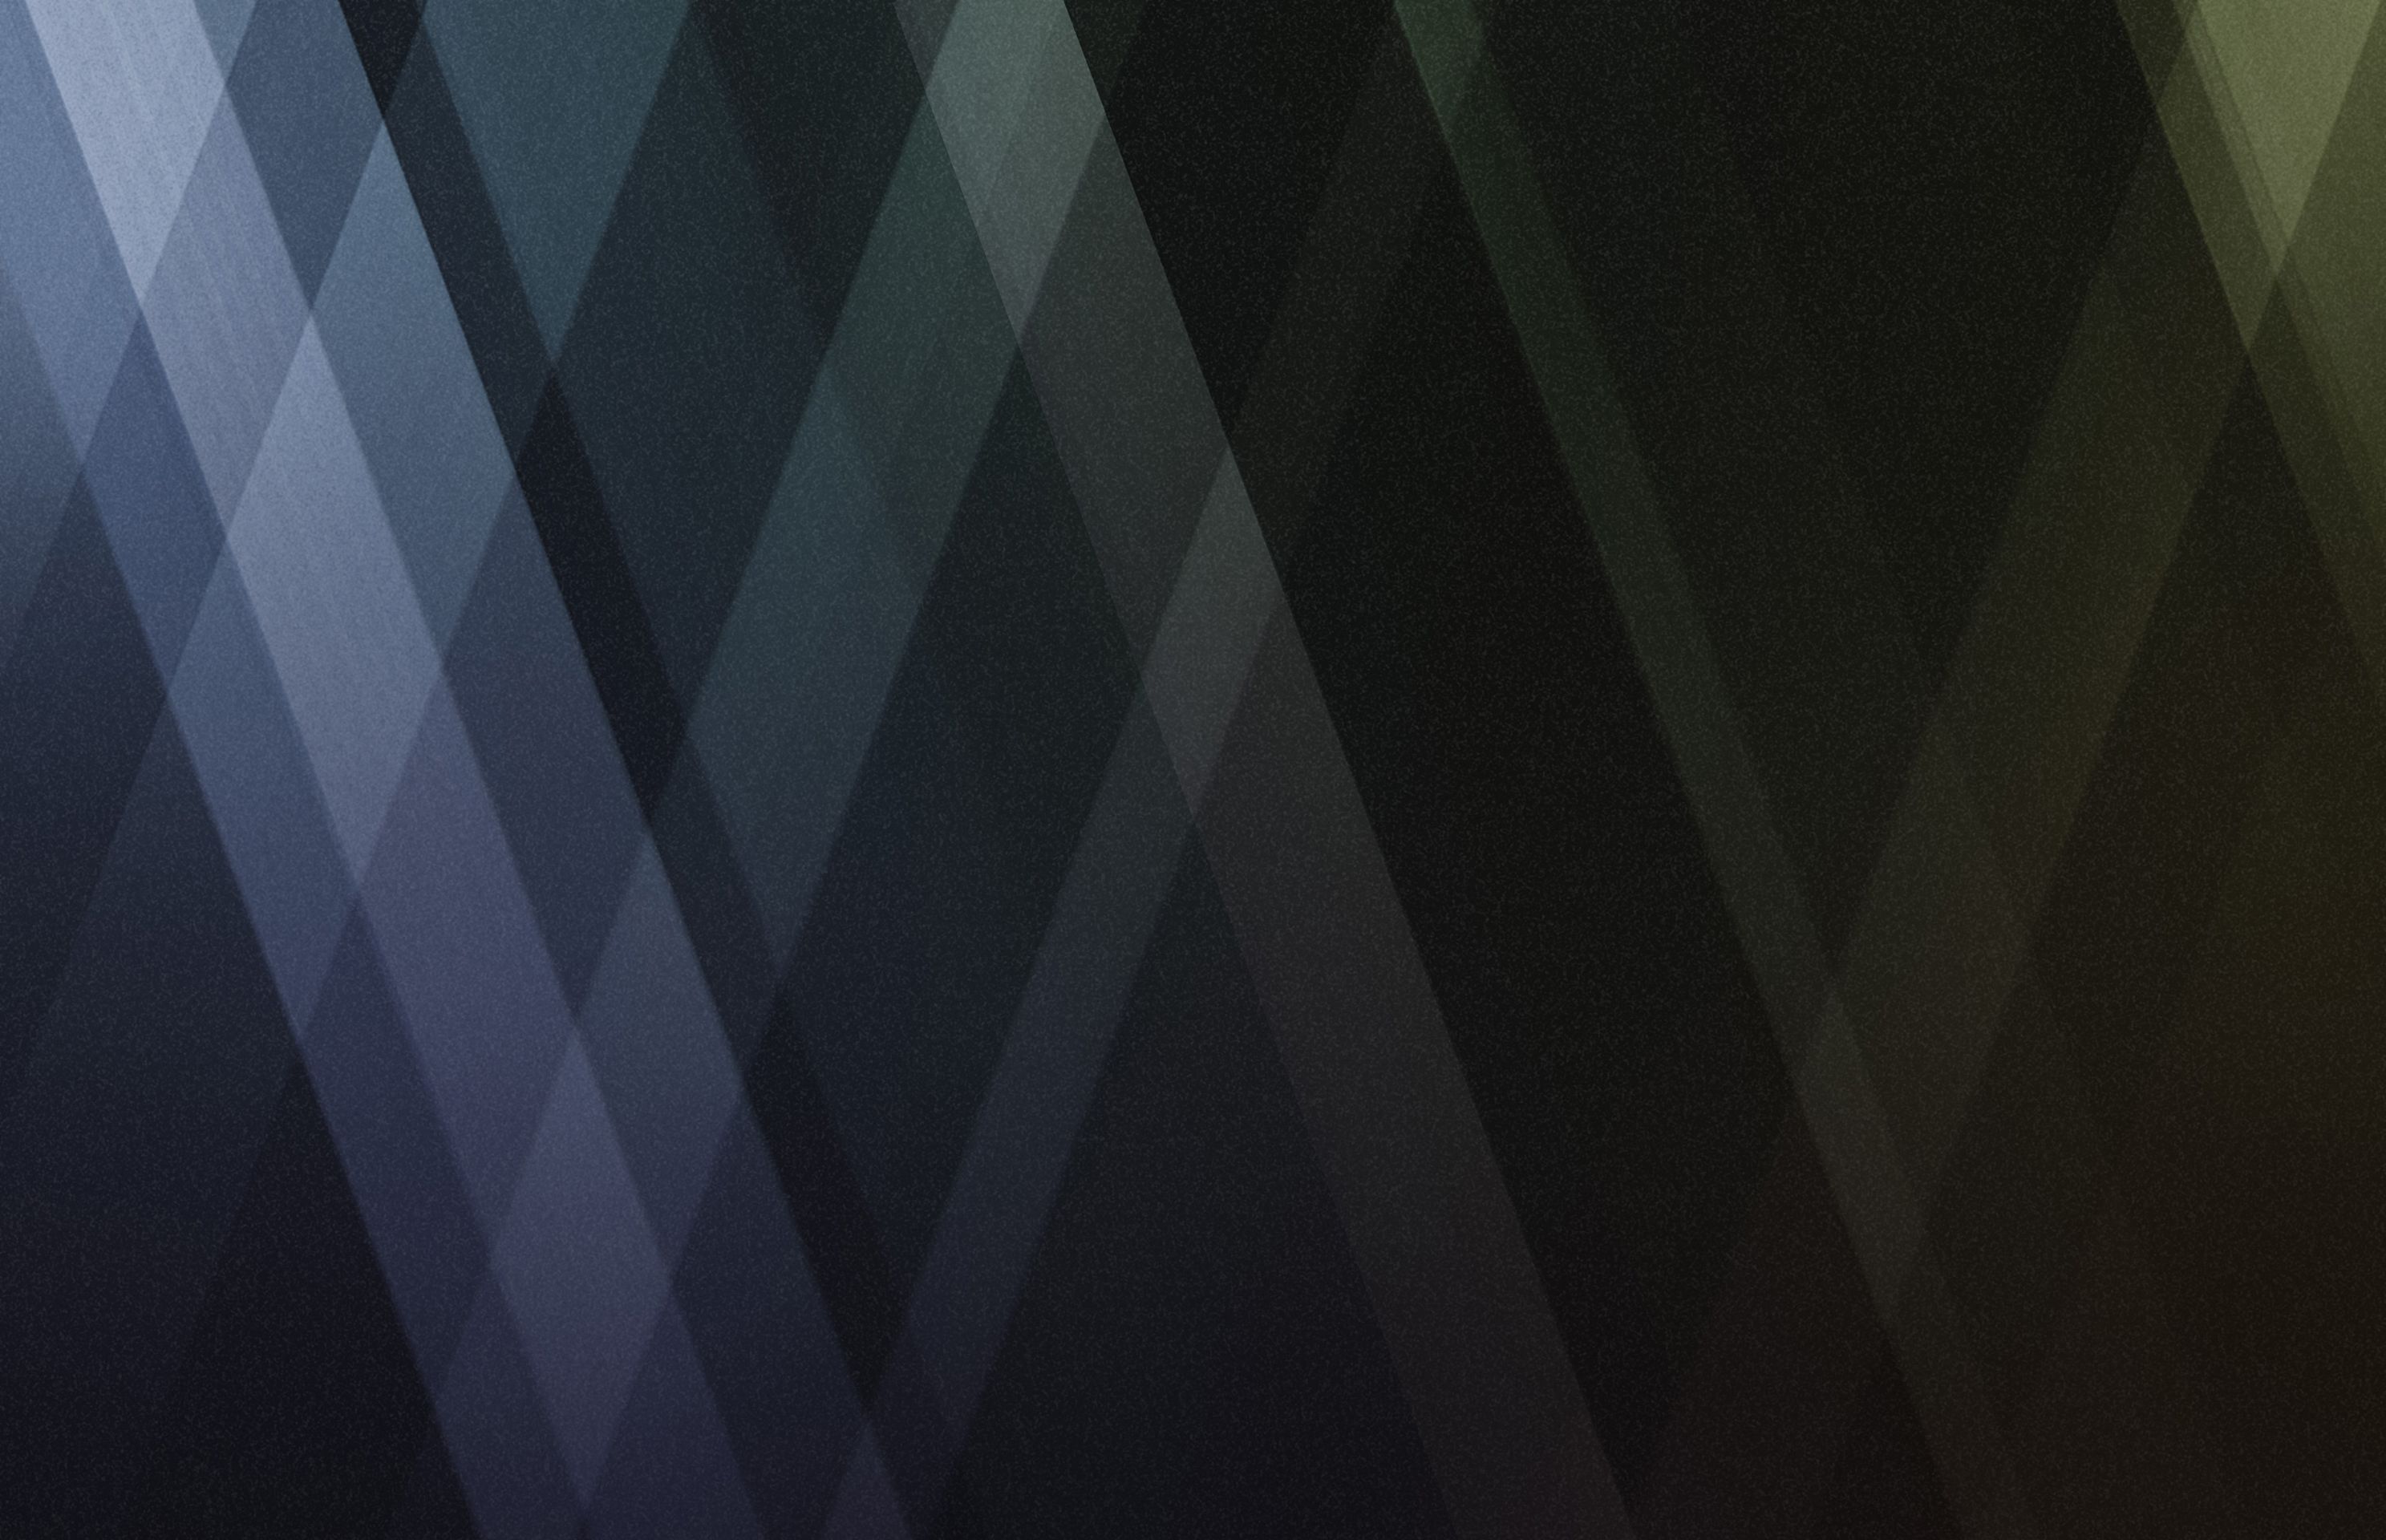 Wallpapers from new Nexus 7 leak out and you can download them here